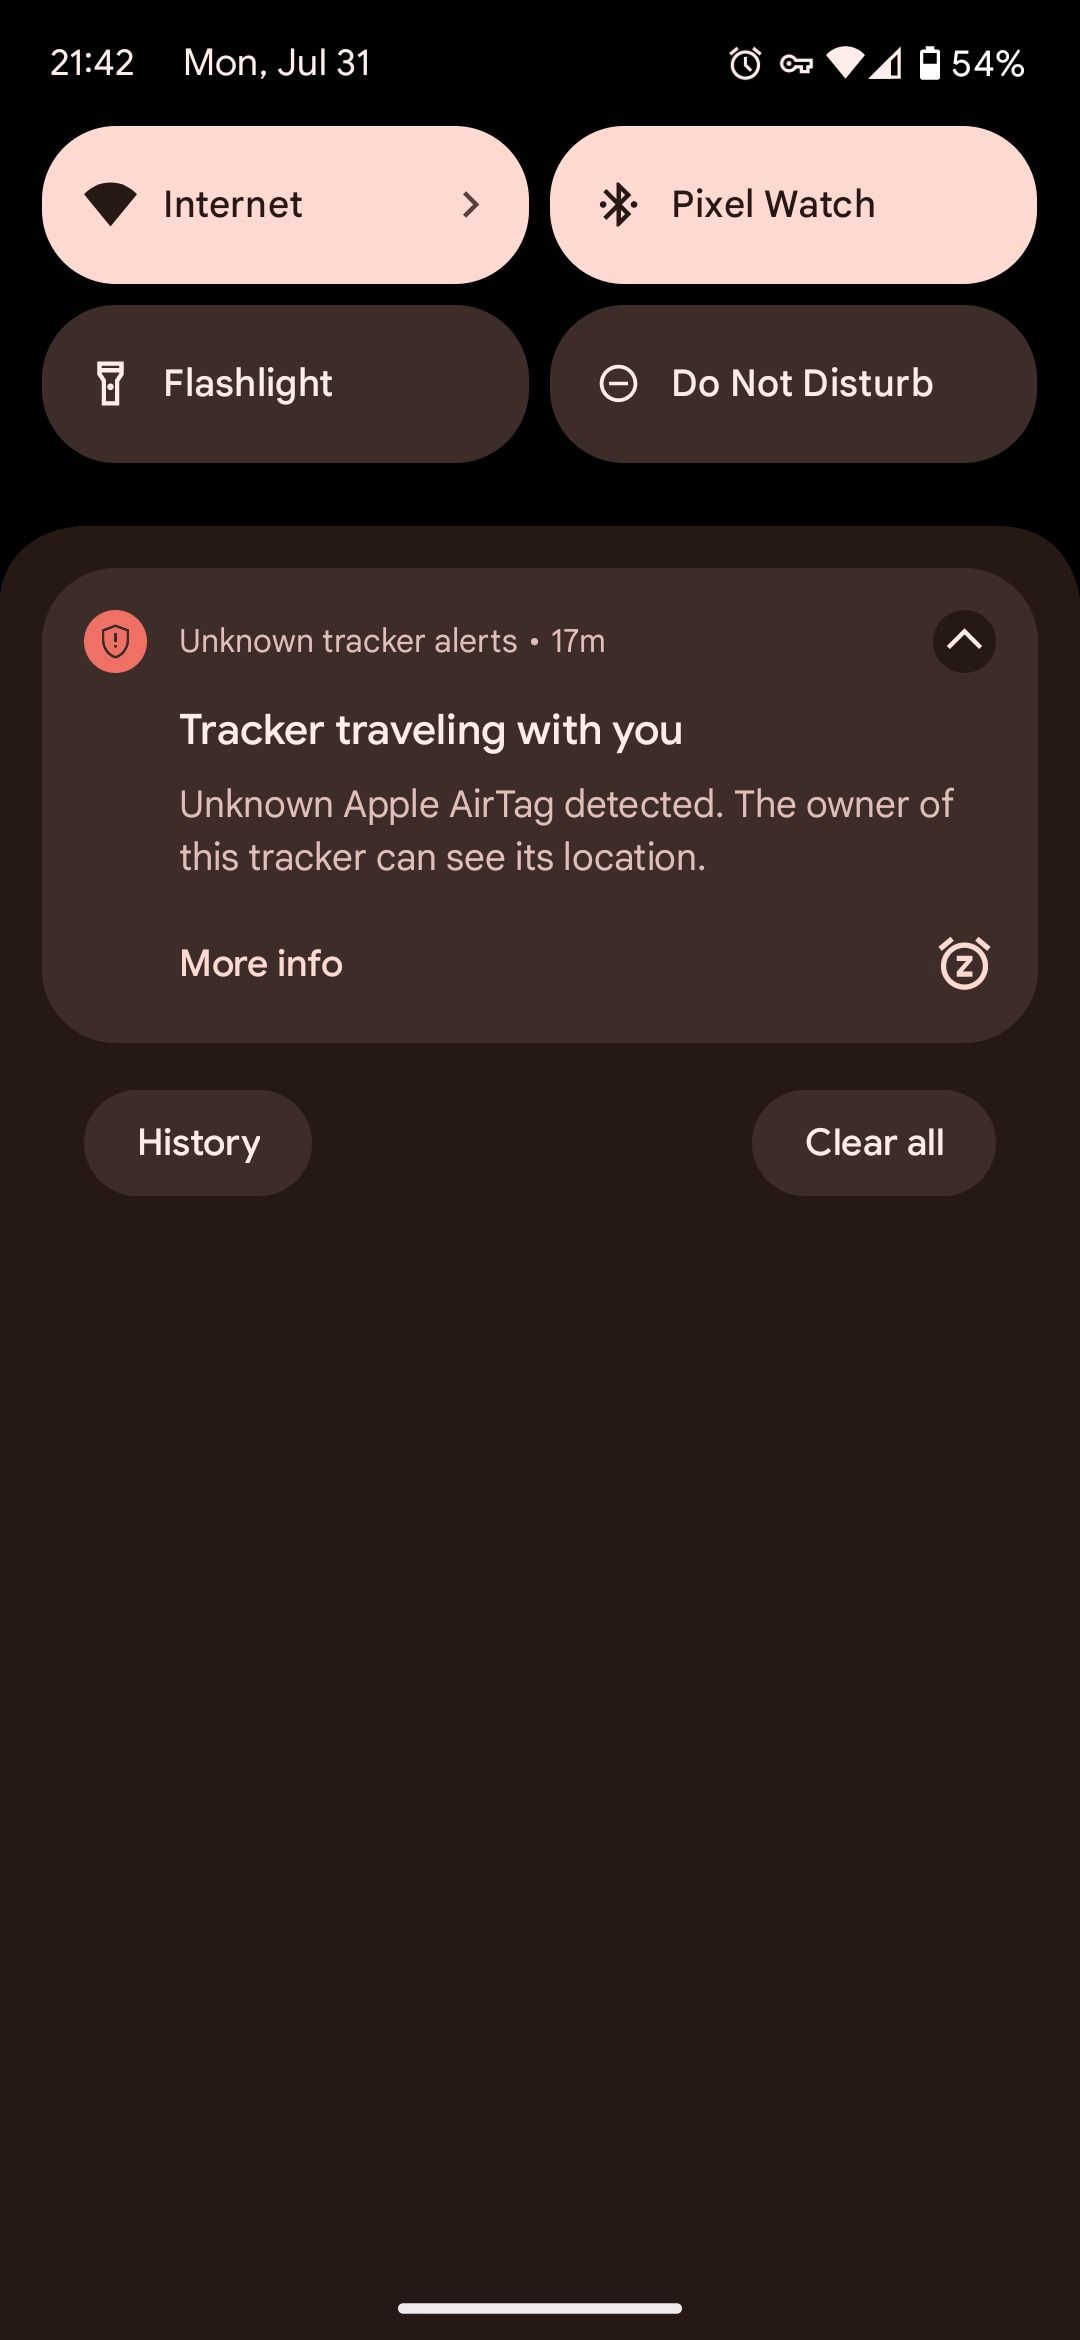 Android's new 'unknown tracker alerts' can help warn users of rogue Apple  AirTags